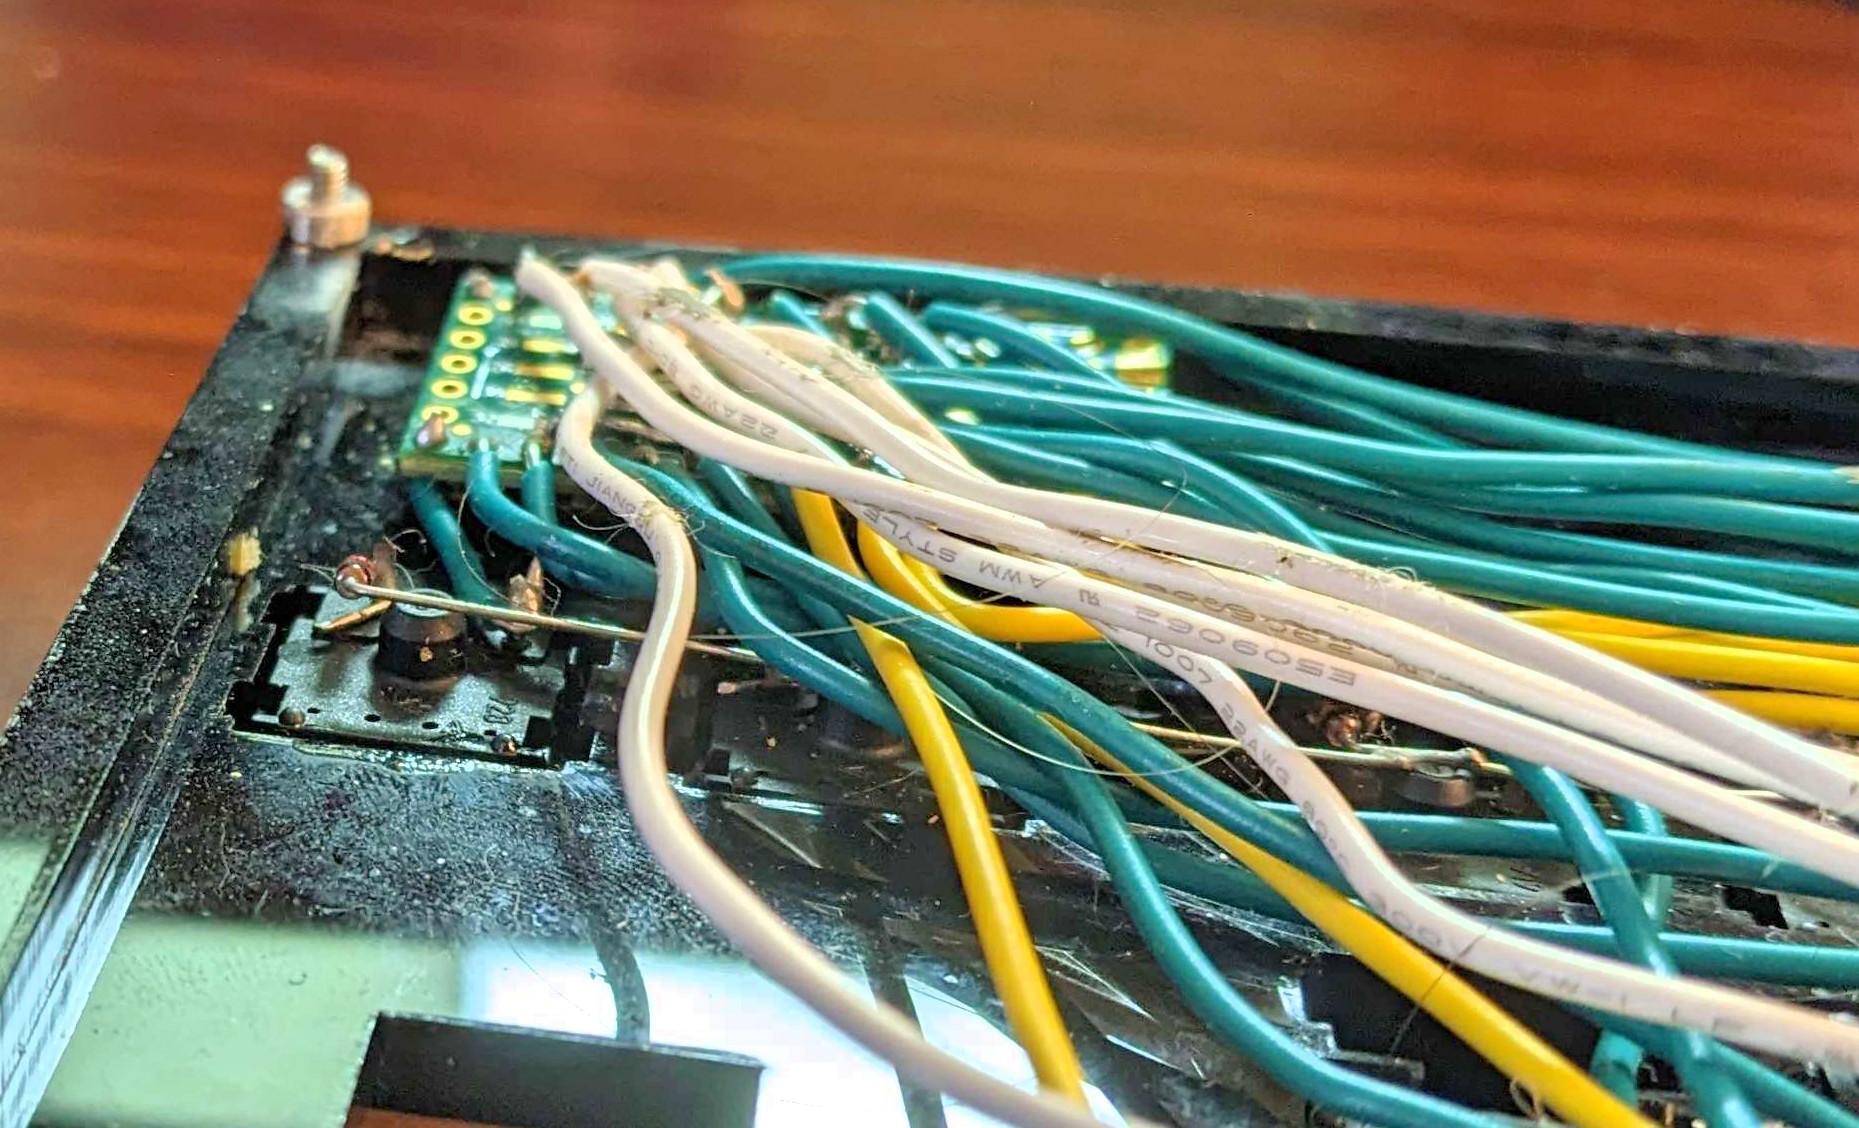 A photograph of the issue in question, showing many colored wires more or less completely covering a pcb